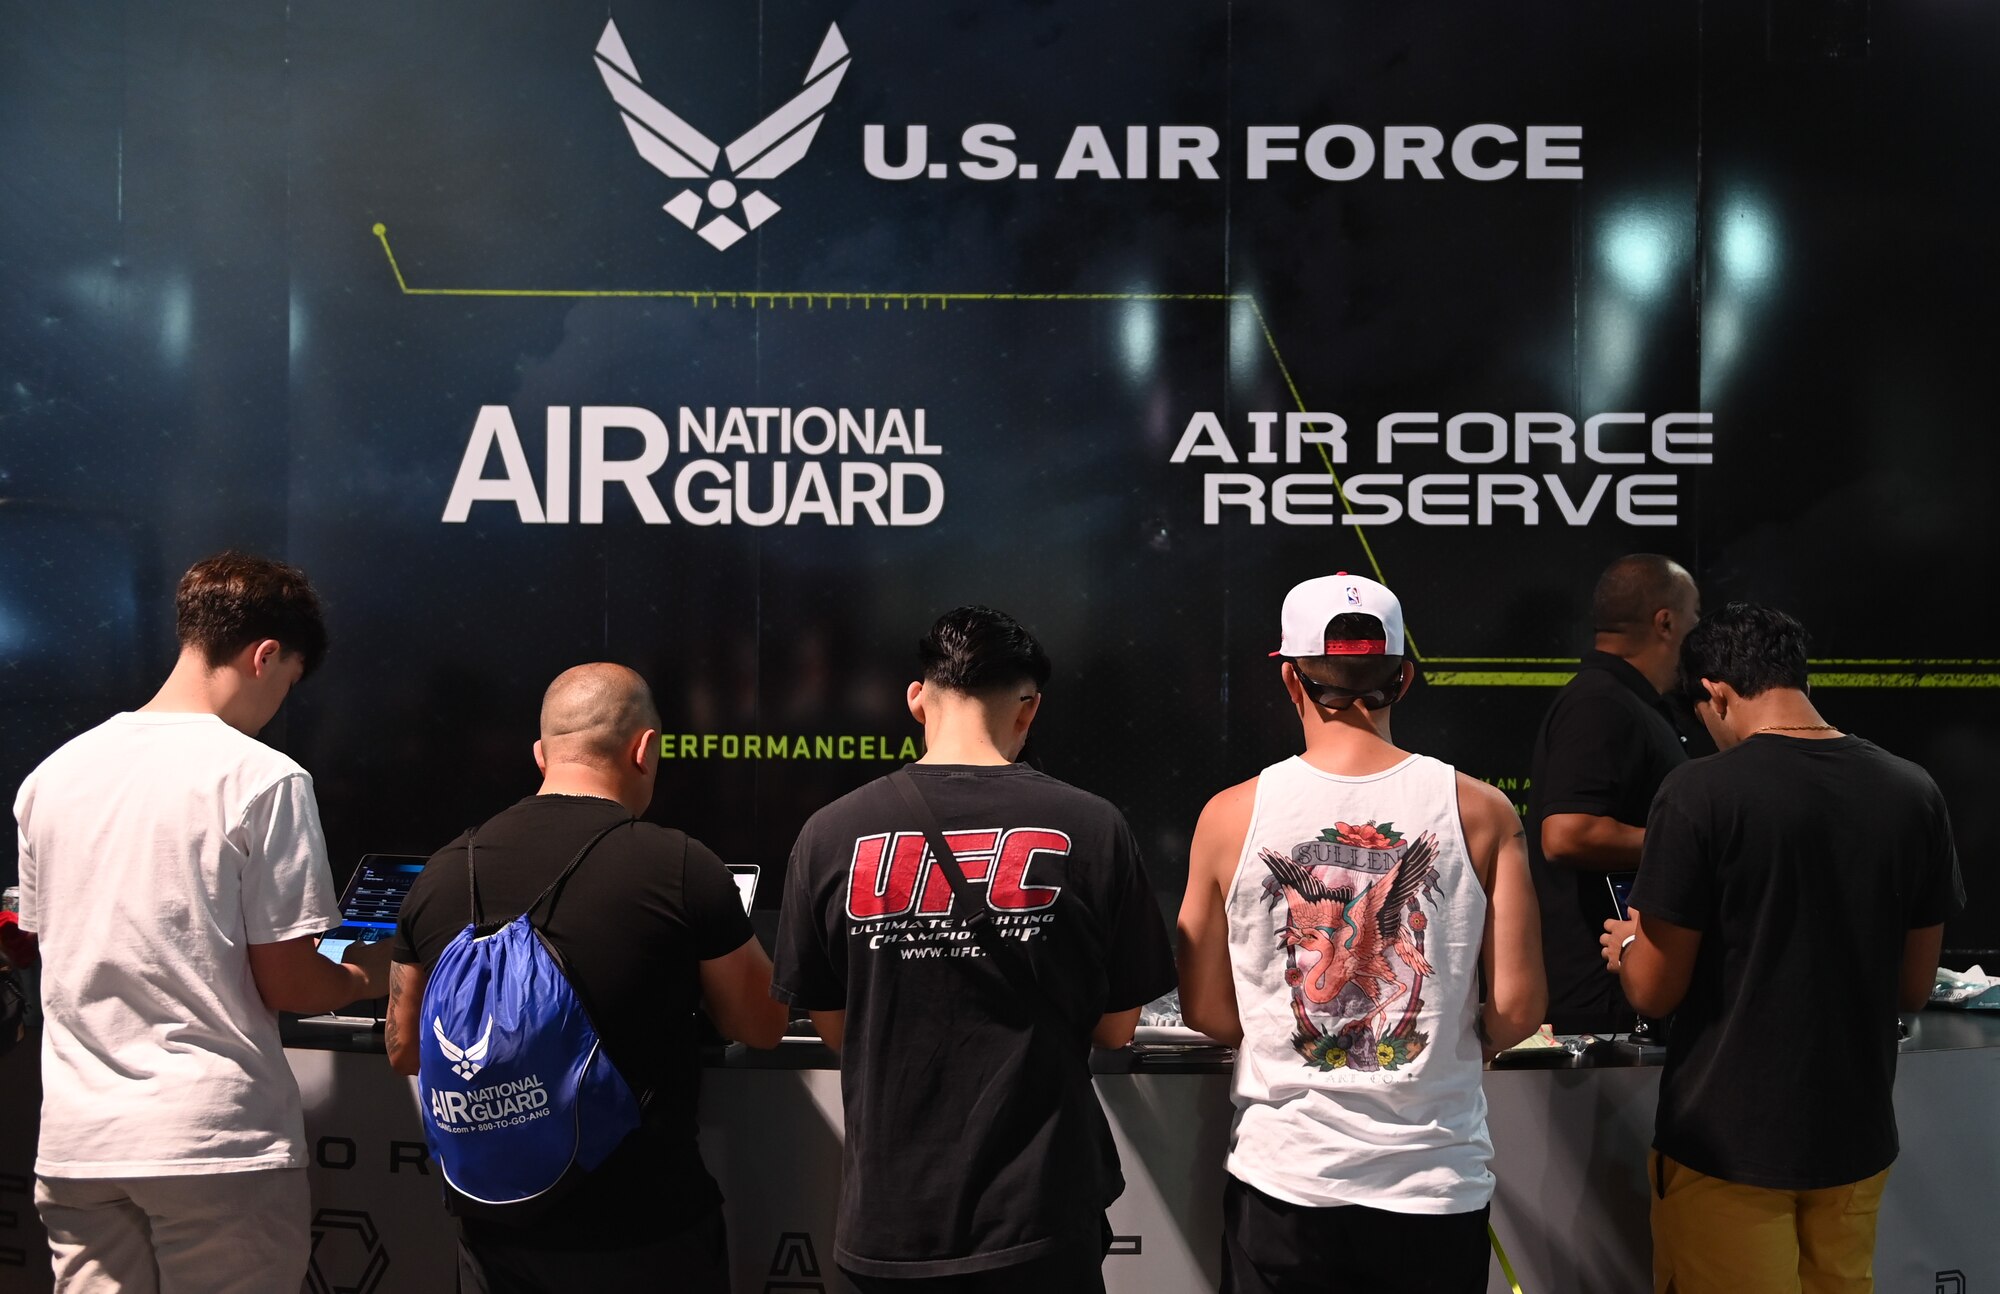 Ultimate Fight Championship fans sign up to participate in the Air Force Performance Lab at UFC International Fight Week event in Las Vegas, July 3 - July 9 2023.